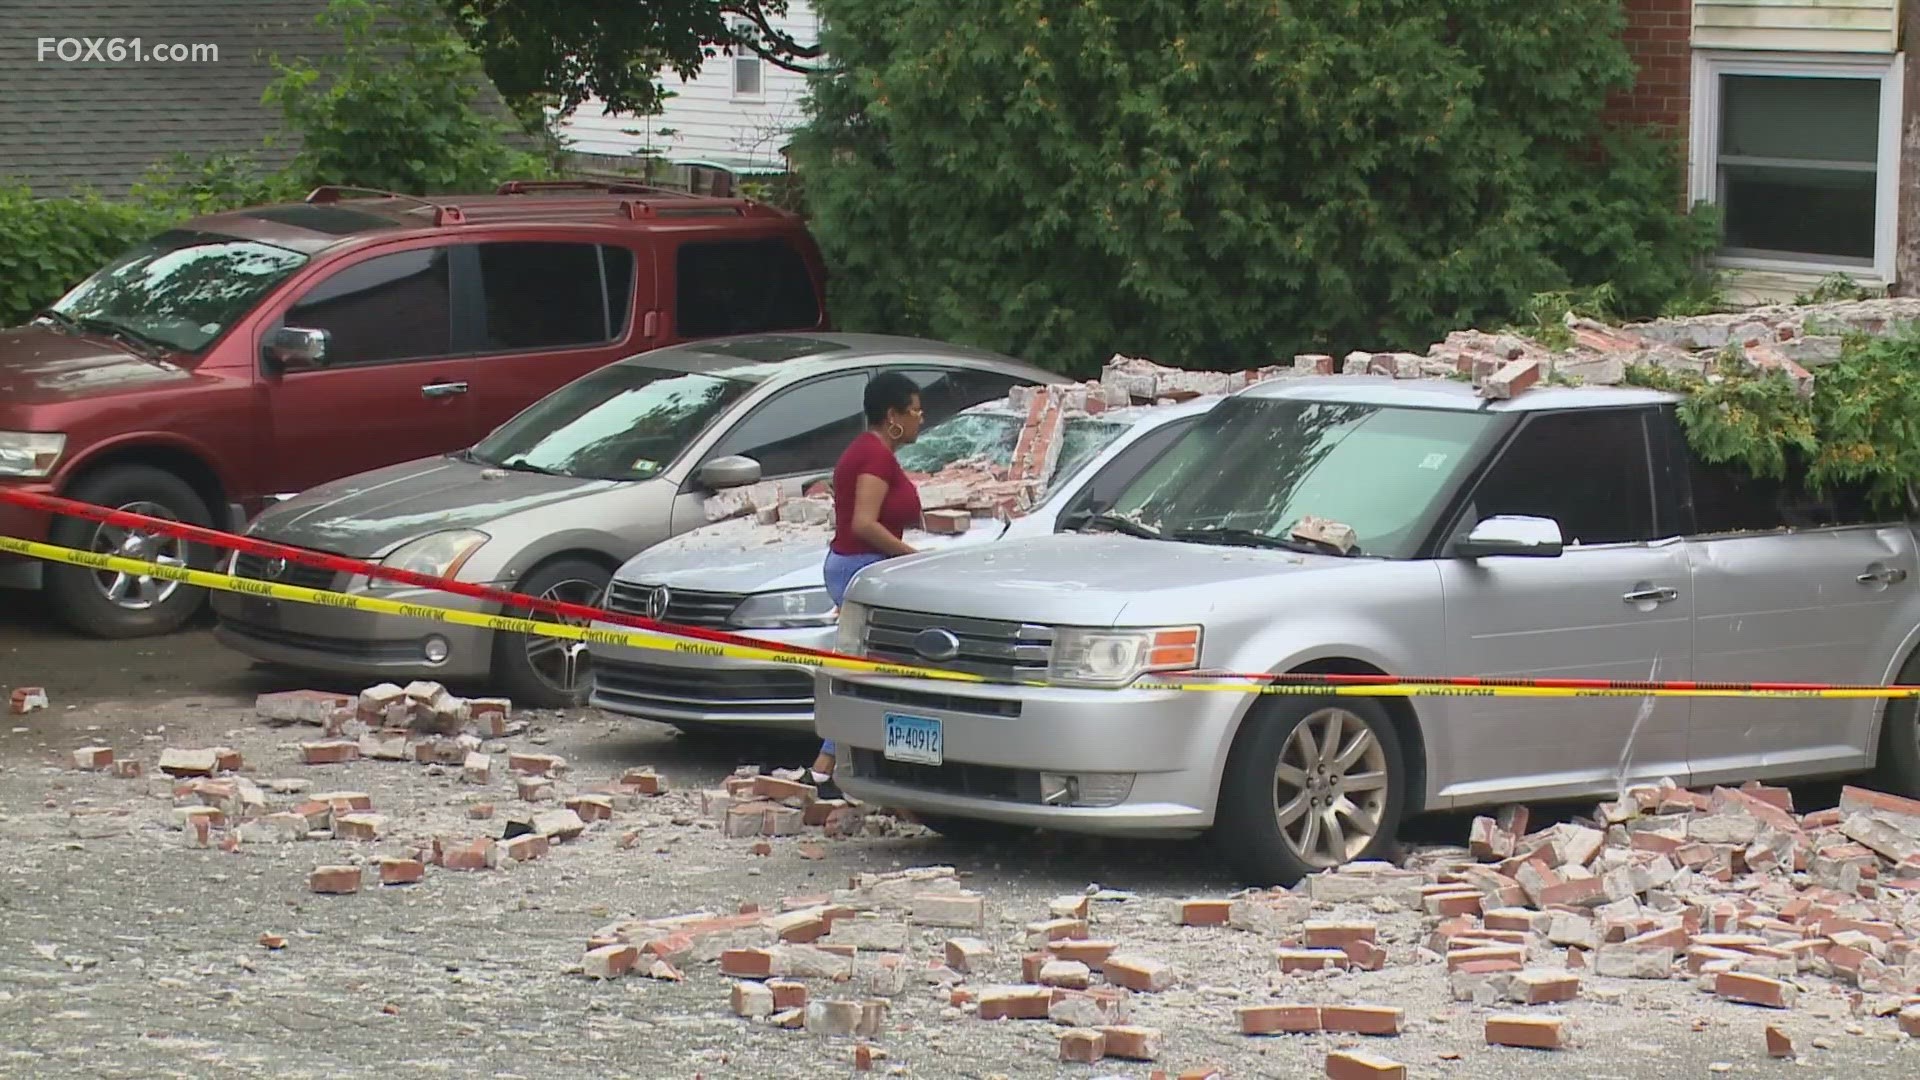 Bricks fell from the side of one of the East Meadow condo buildings located on Thompson Avenue. The bricks landed on top of two cars parked in the parking lot.